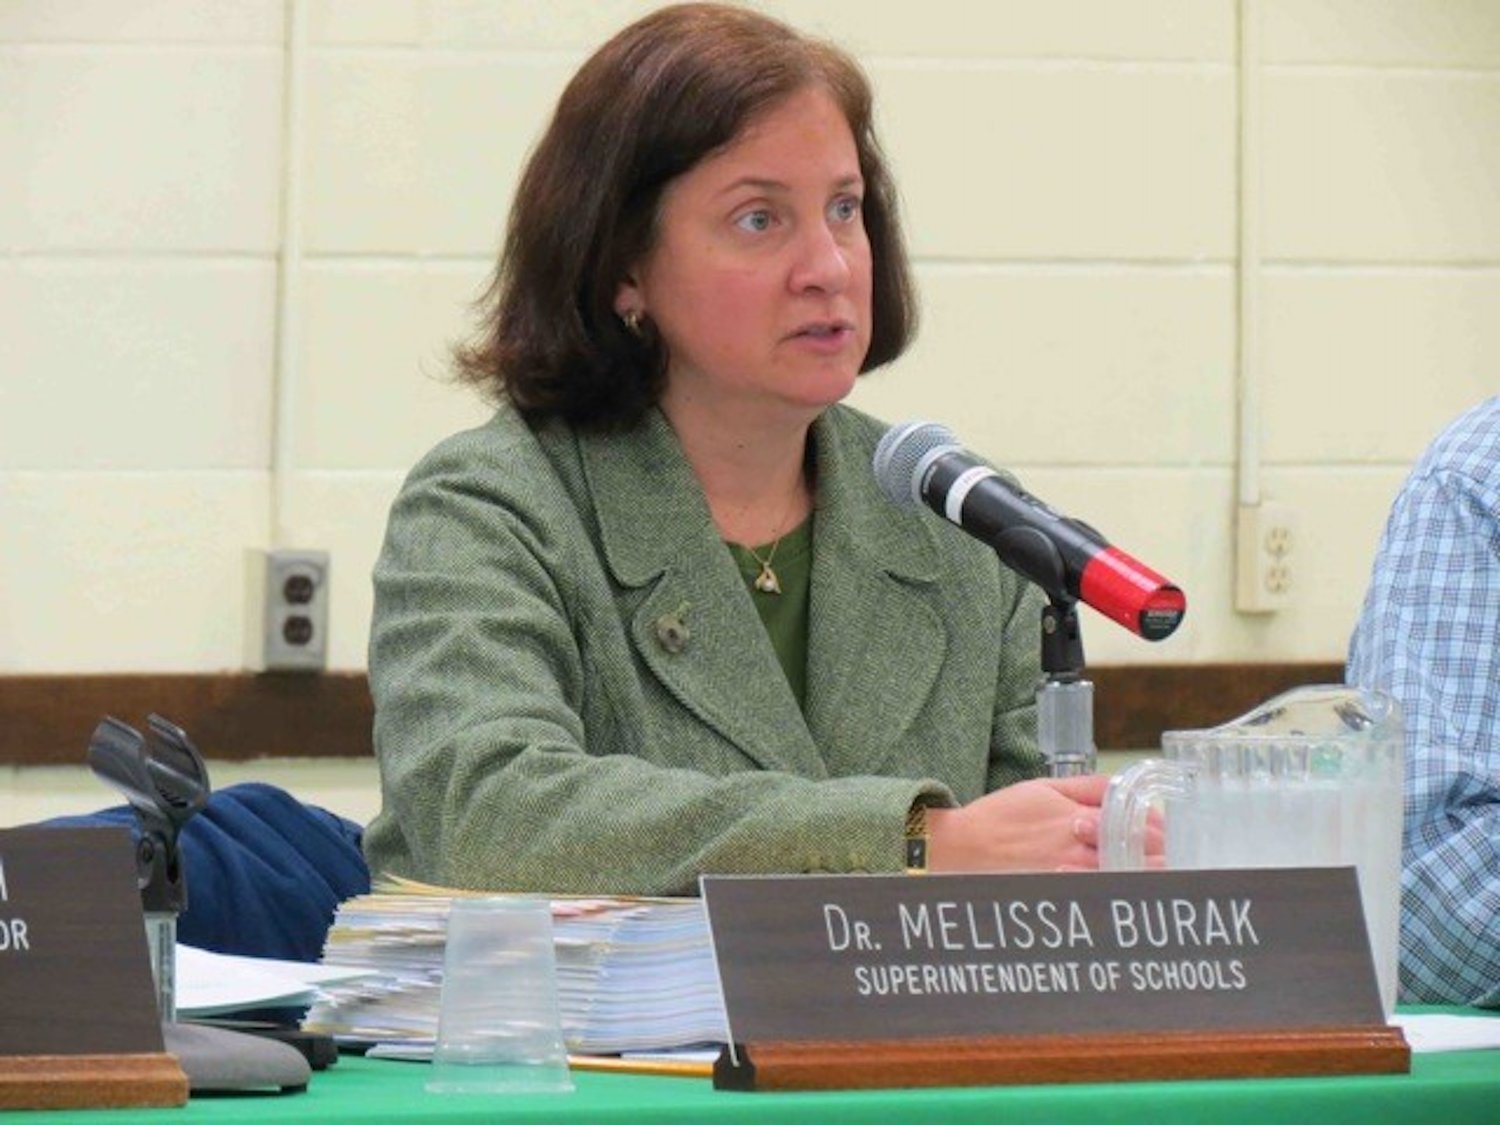 Lynbrook Superintendent Dr. Melissa Burak posted a letter on the district’s website noting the need for an anti-racist curriculum, while explaining that Lynbrook has worked to include diverse authors and themes in its literature lessons. An alumni group is asking administrators to revamp how Lynbrook schools teach about racism.